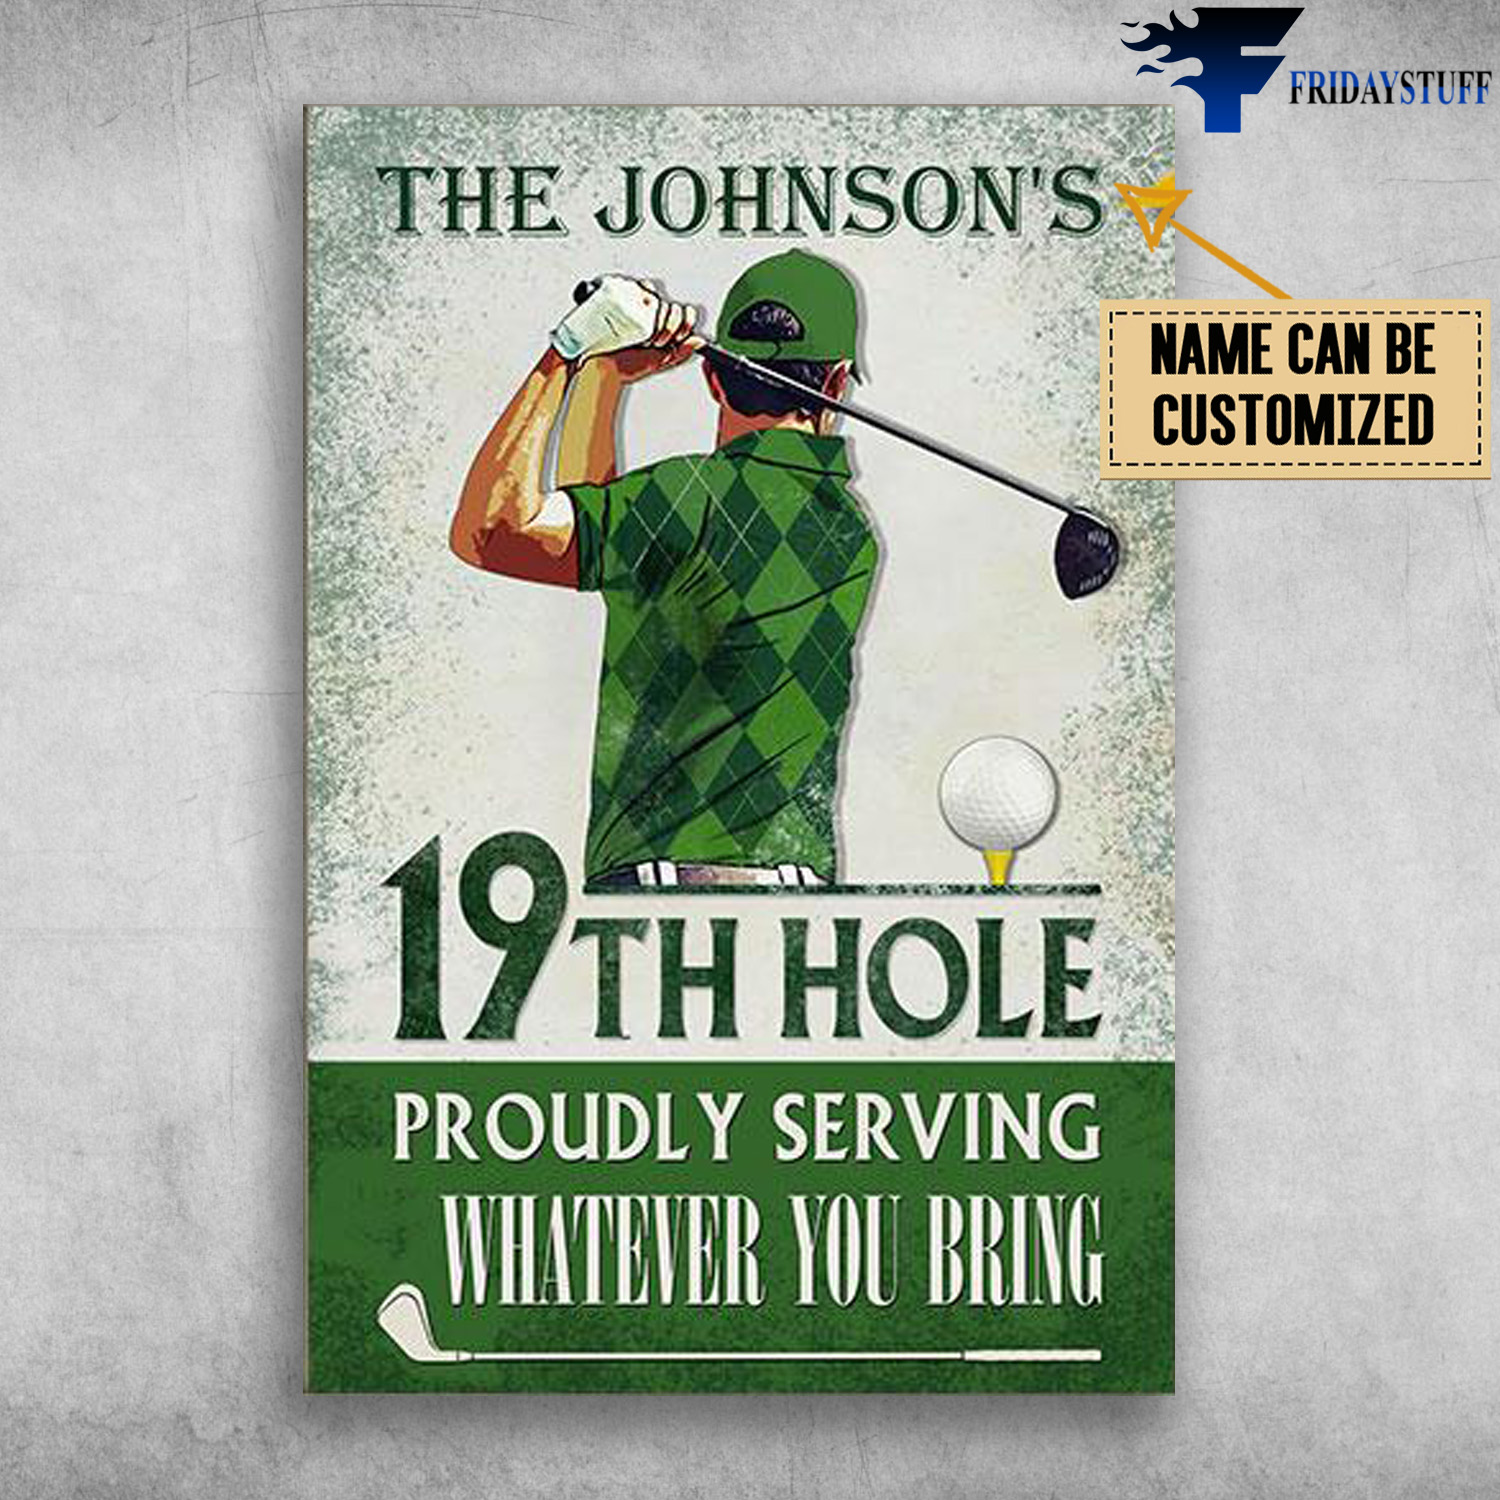 Golf Proudly Serving Green, 19th Hole, Proudly Serving, Whatever You Bring